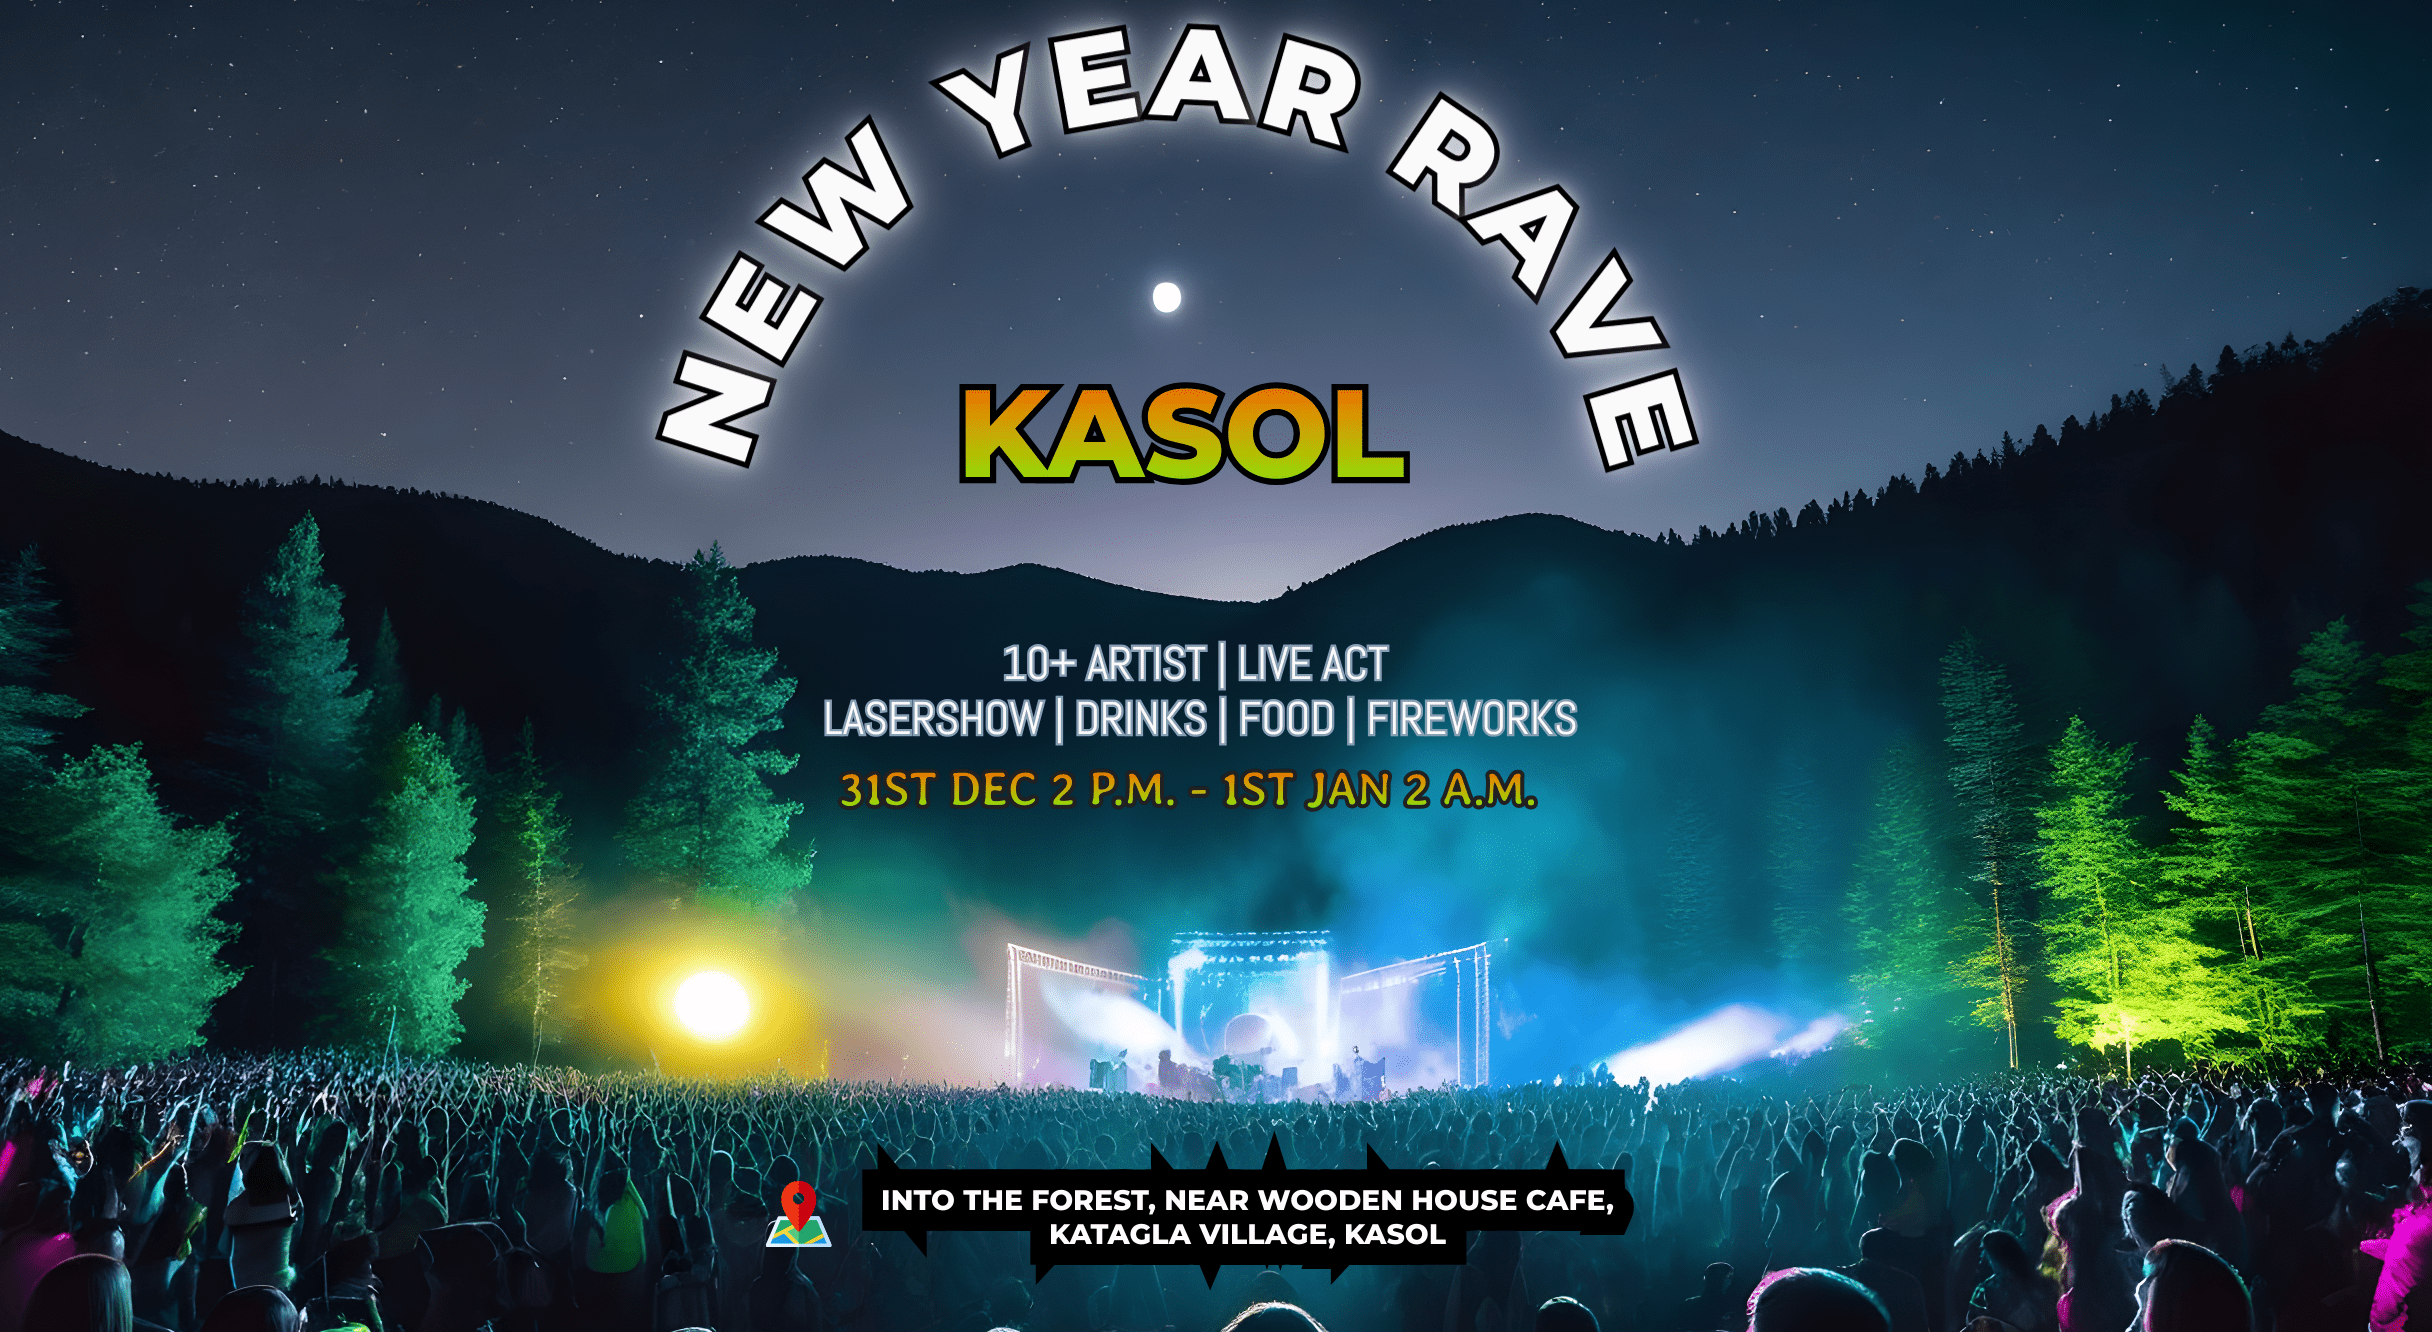 New Year Rave Party, 31st Dec